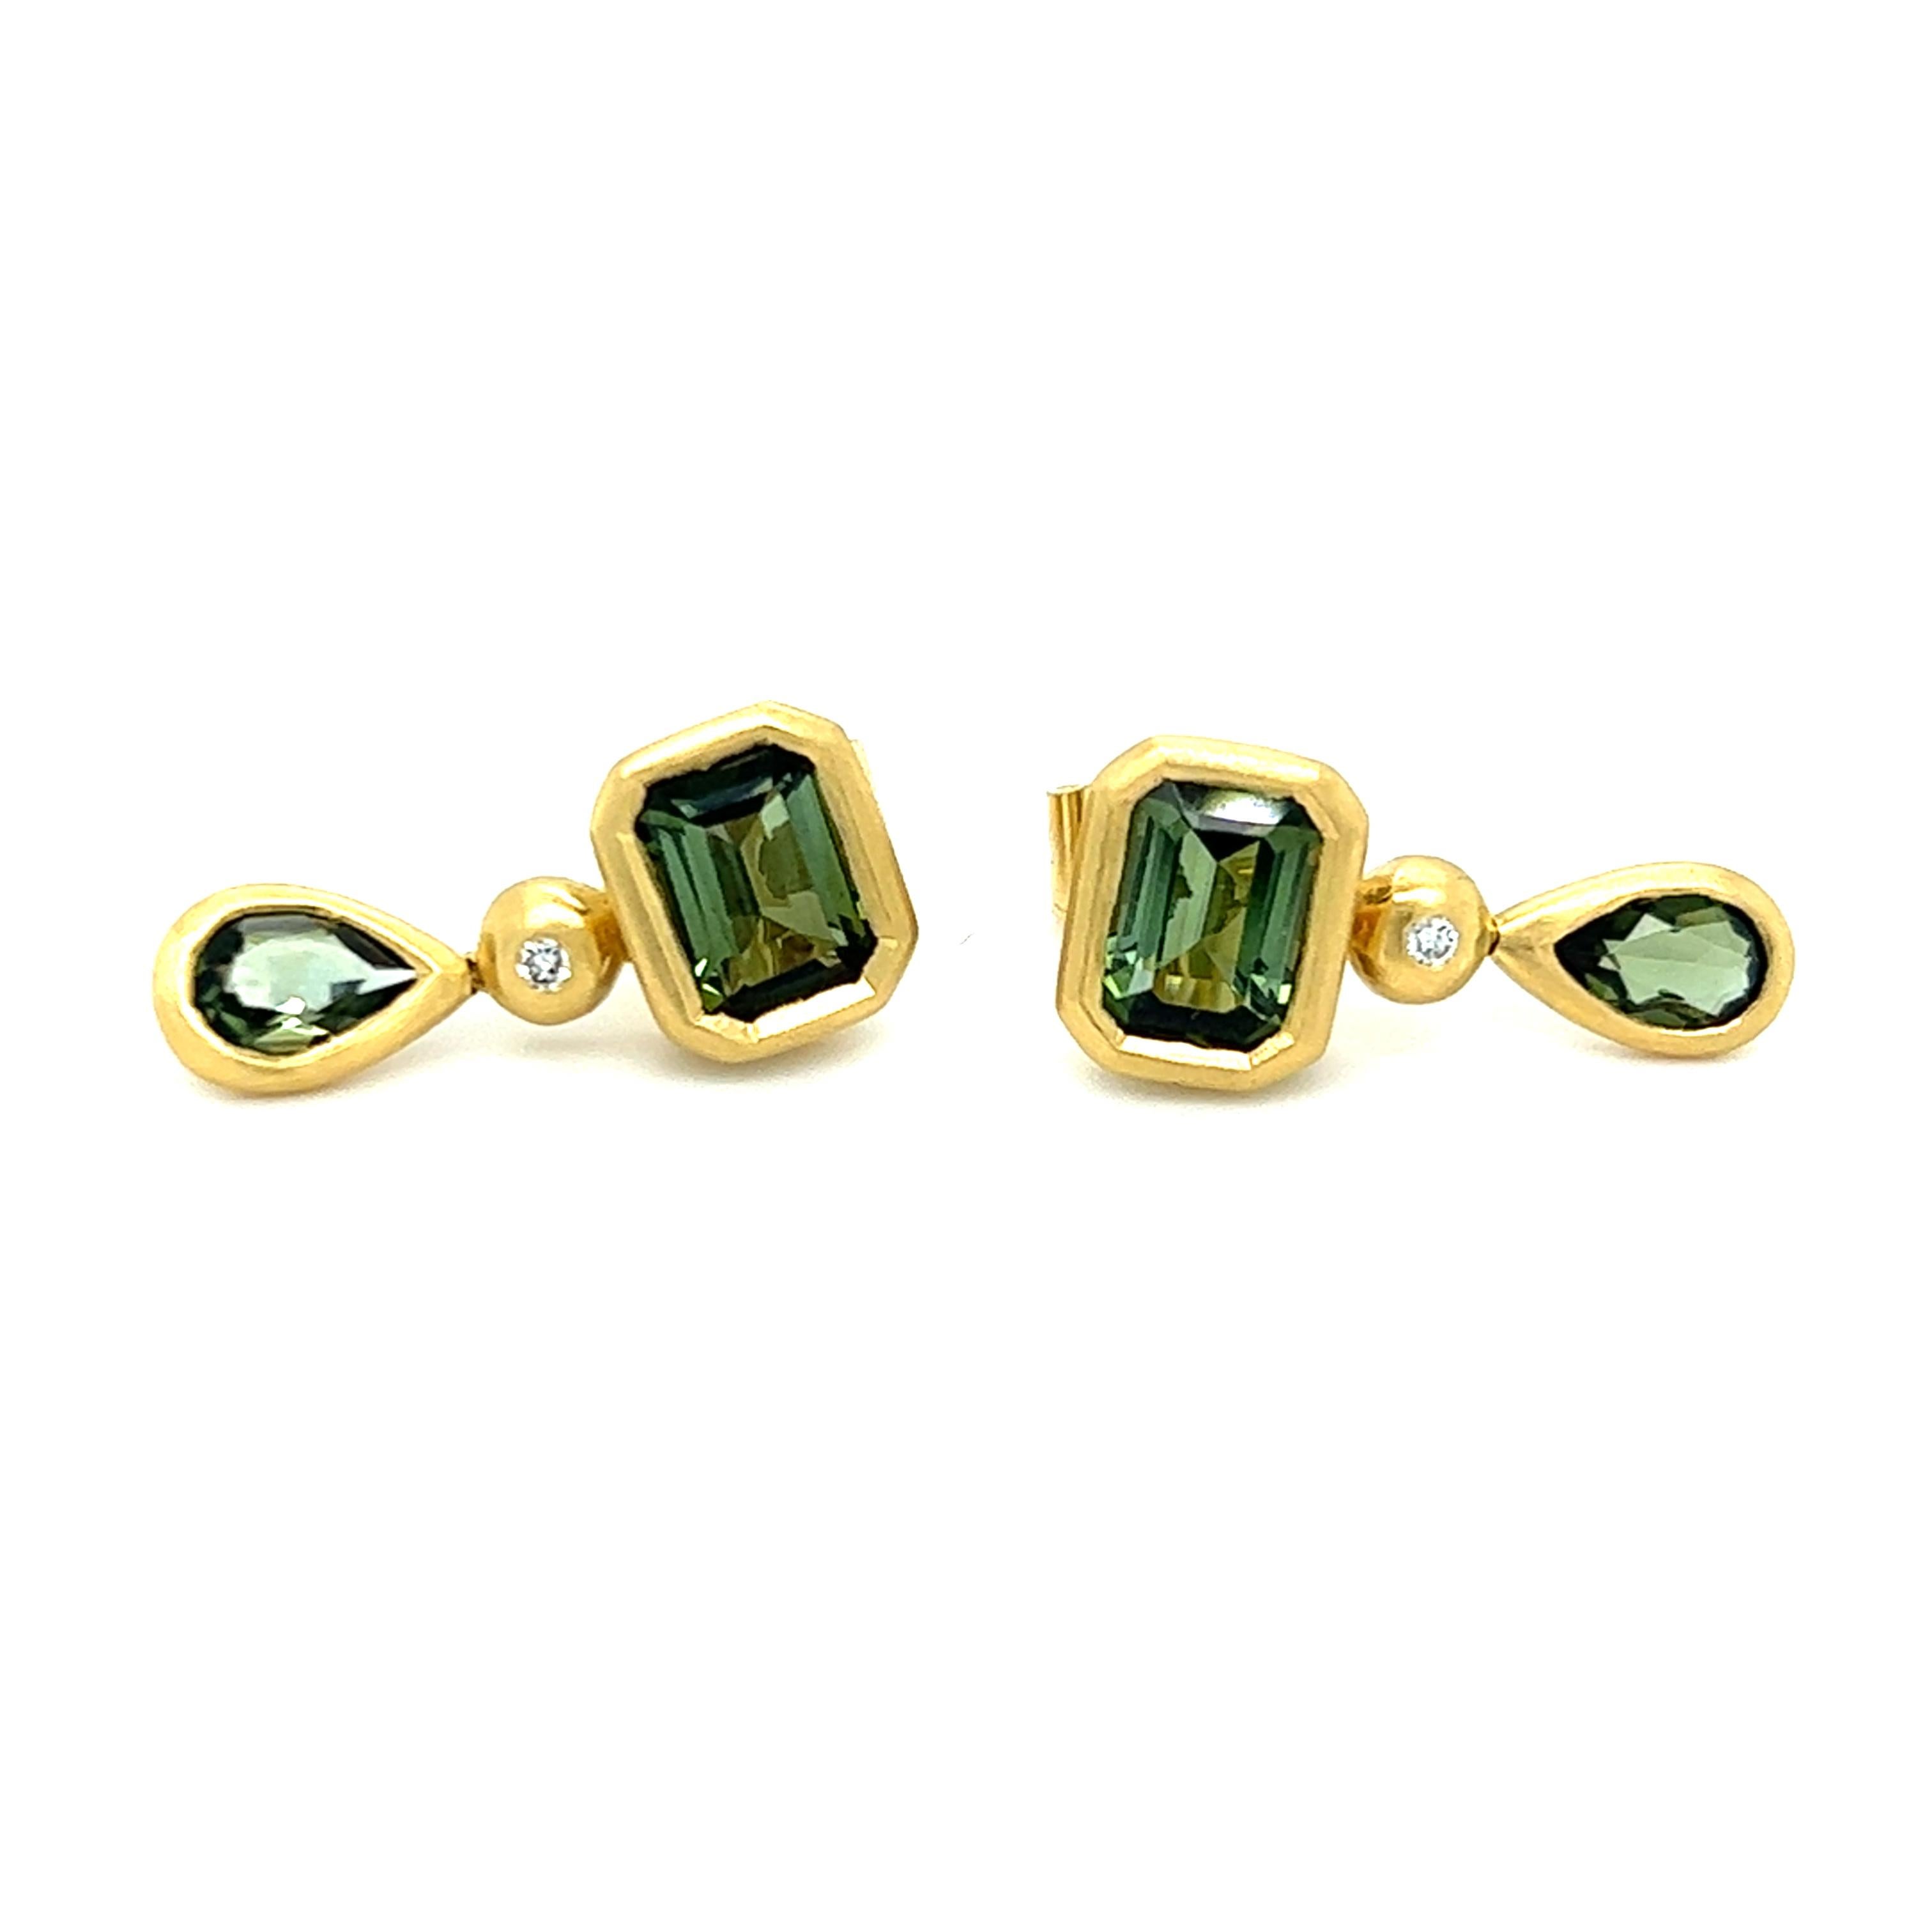 Contemporary H. Stern Green Tourmaline and Diamond Earrings in 18 Karat Gold